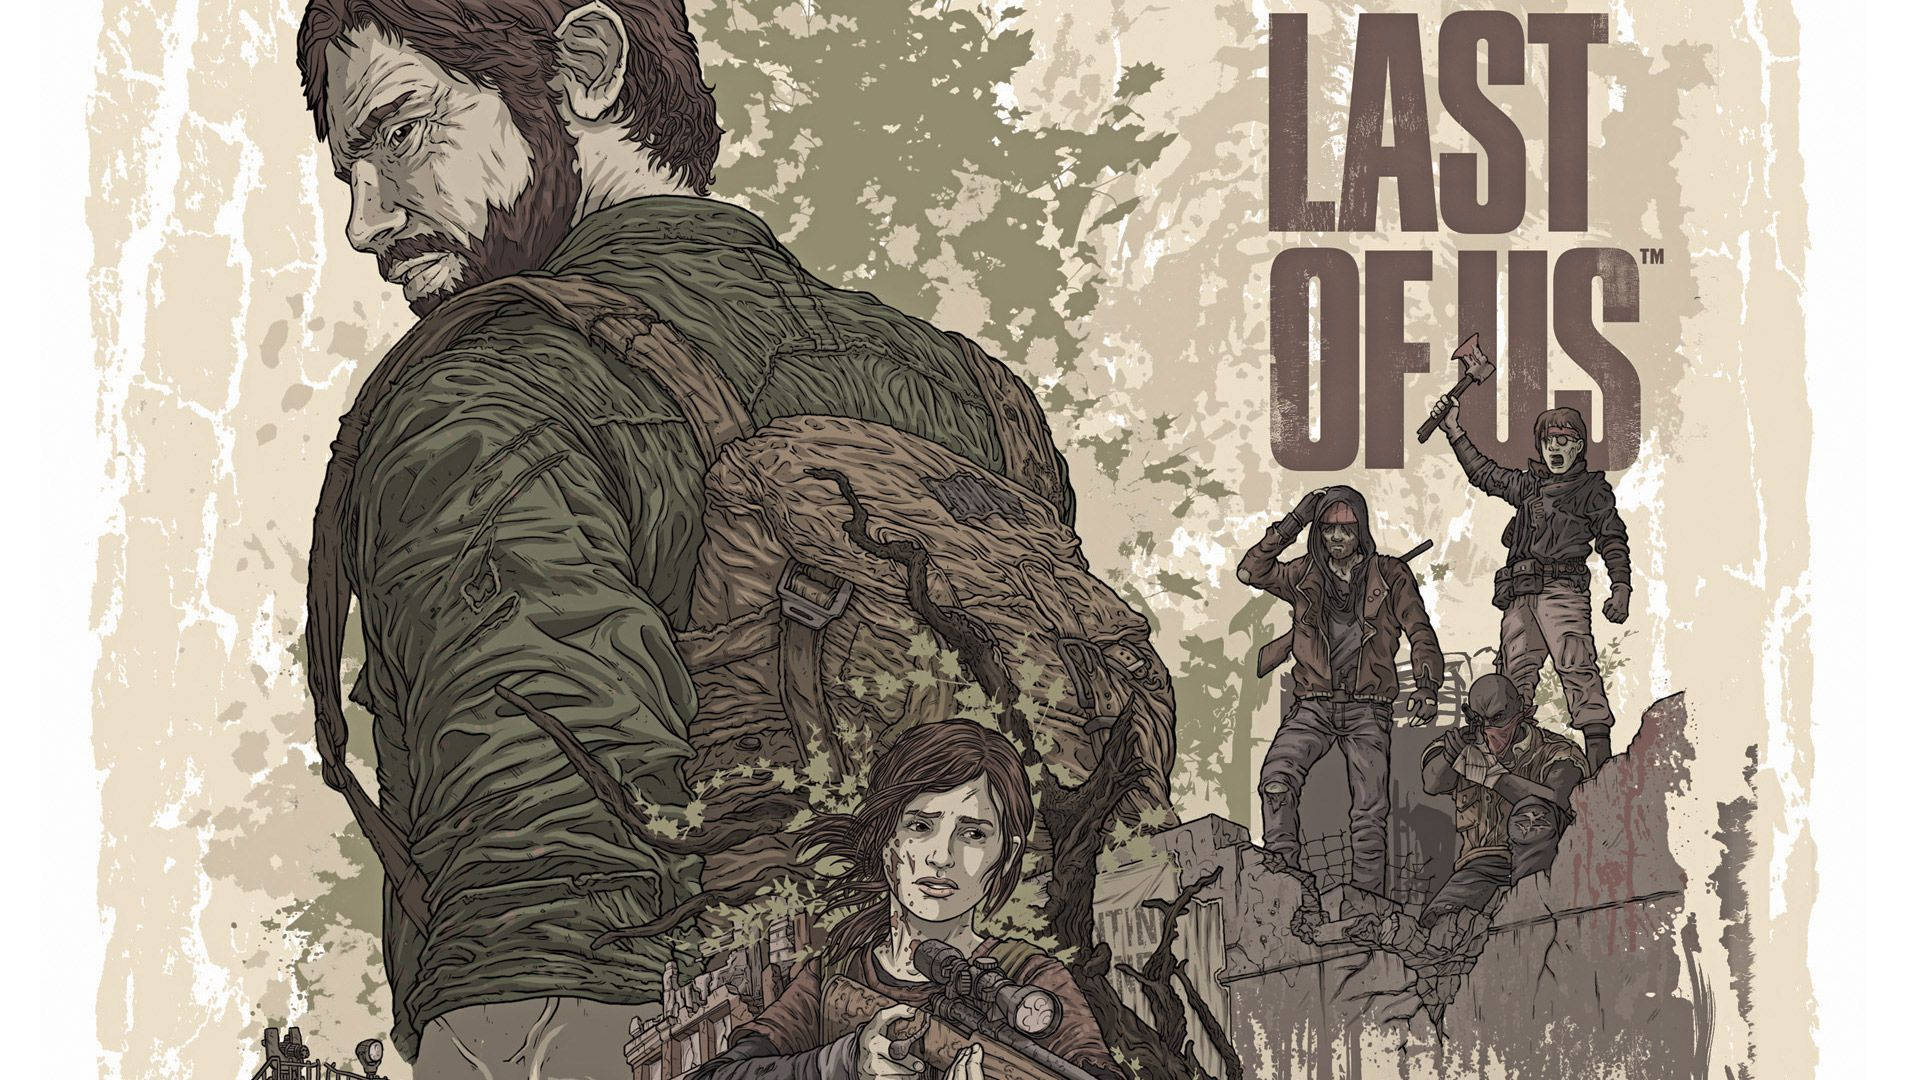 An Apocalyptic Digital Art Poster Of The Award-winning Game The Last Of Us Background